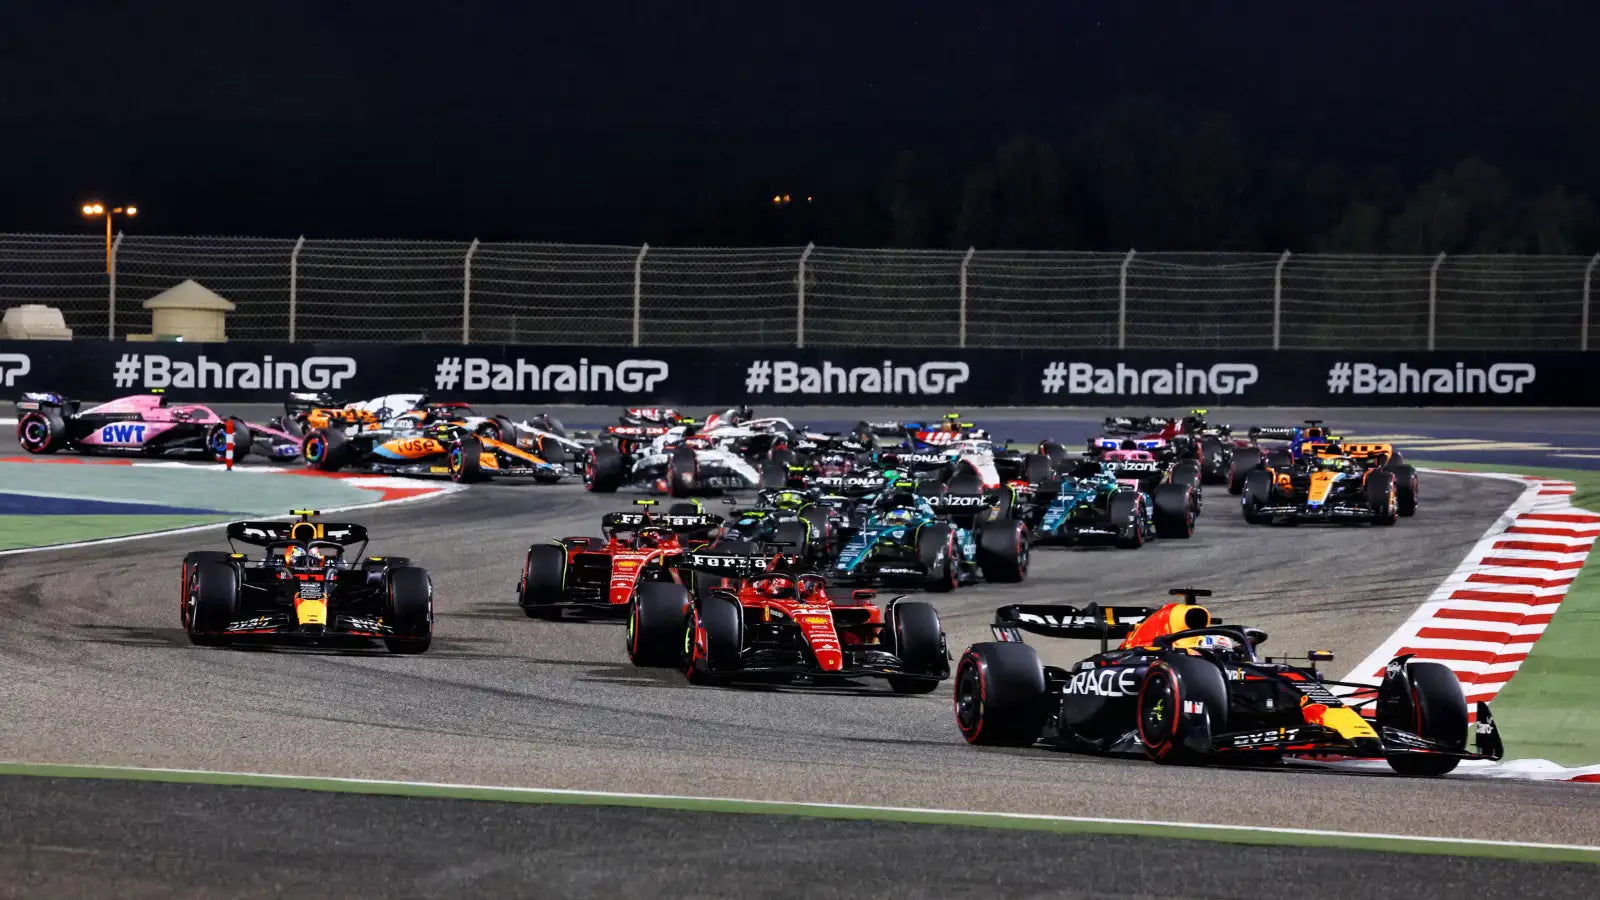 Christian Horner investigation distracts F1 attention ahead of Bahrain Grand Prix